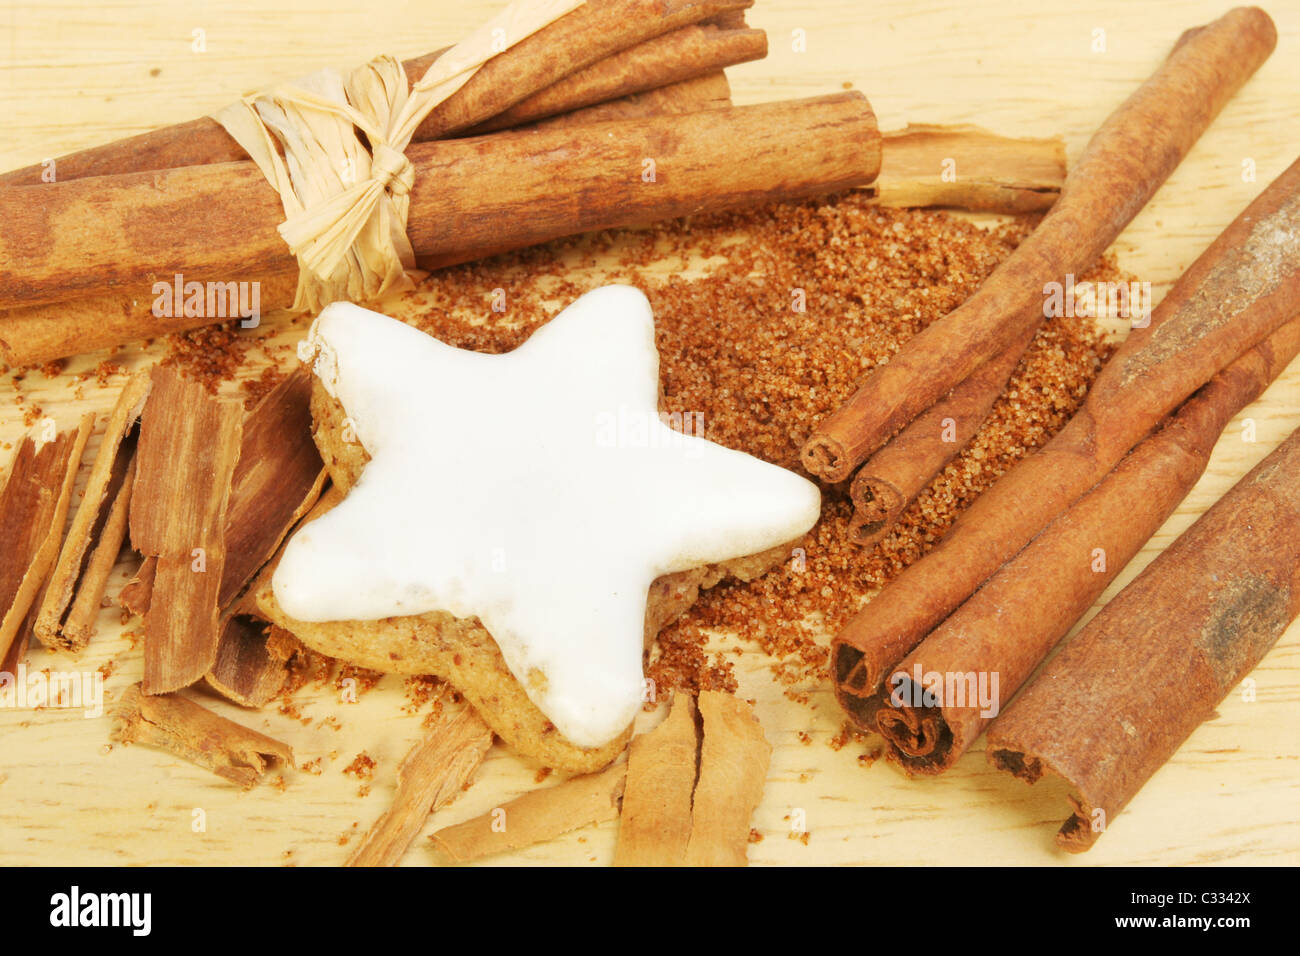 Cinnamon spice and a cinnamon flavored lebkuchen biscuit Stock Photo